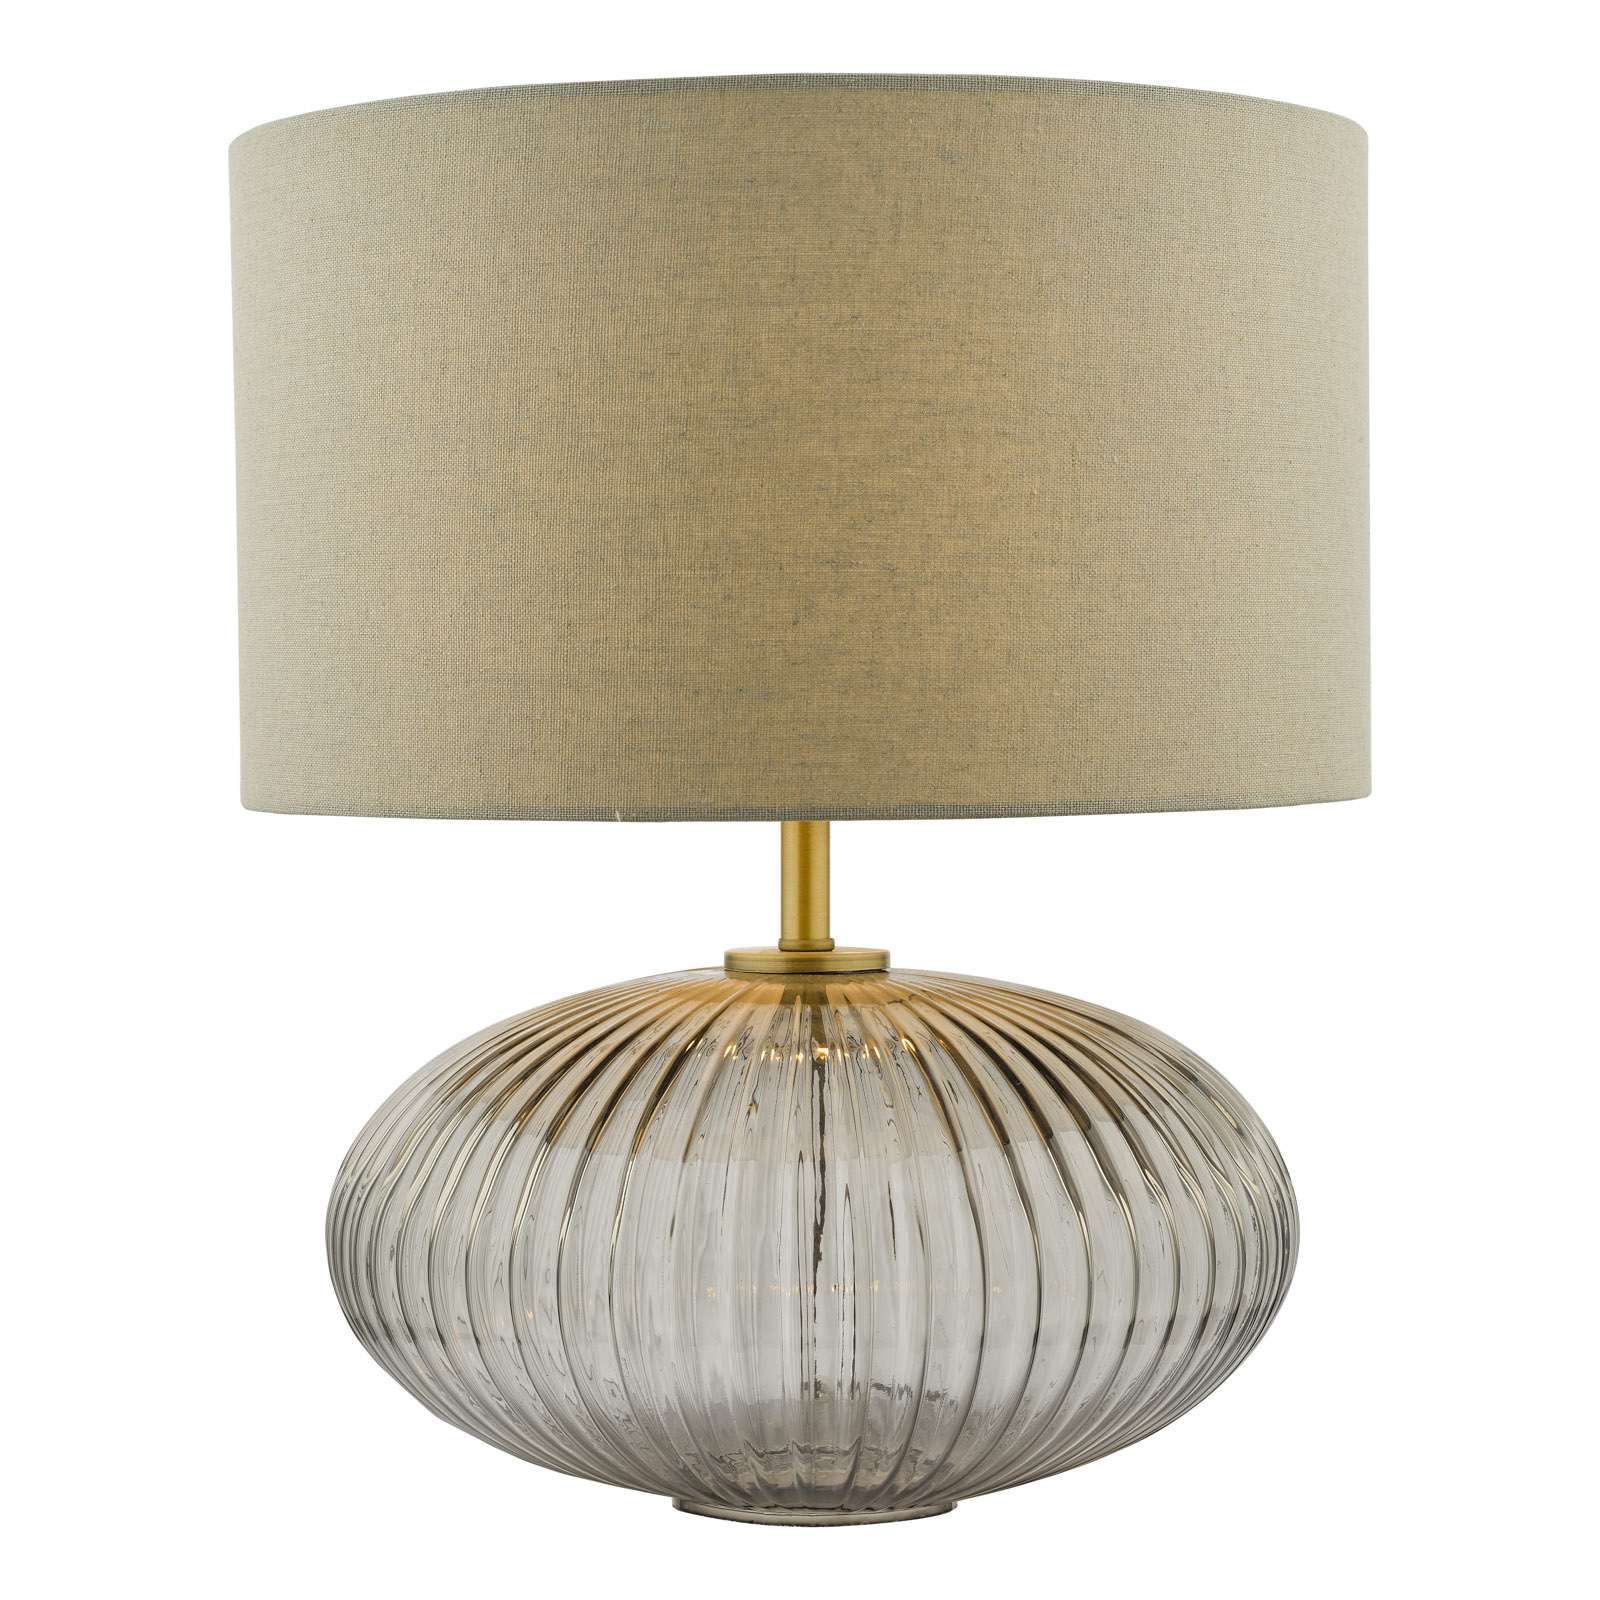 Edmond Table Lamp Smoked Glass Antique, Brass Table Lamp With Glass Shade